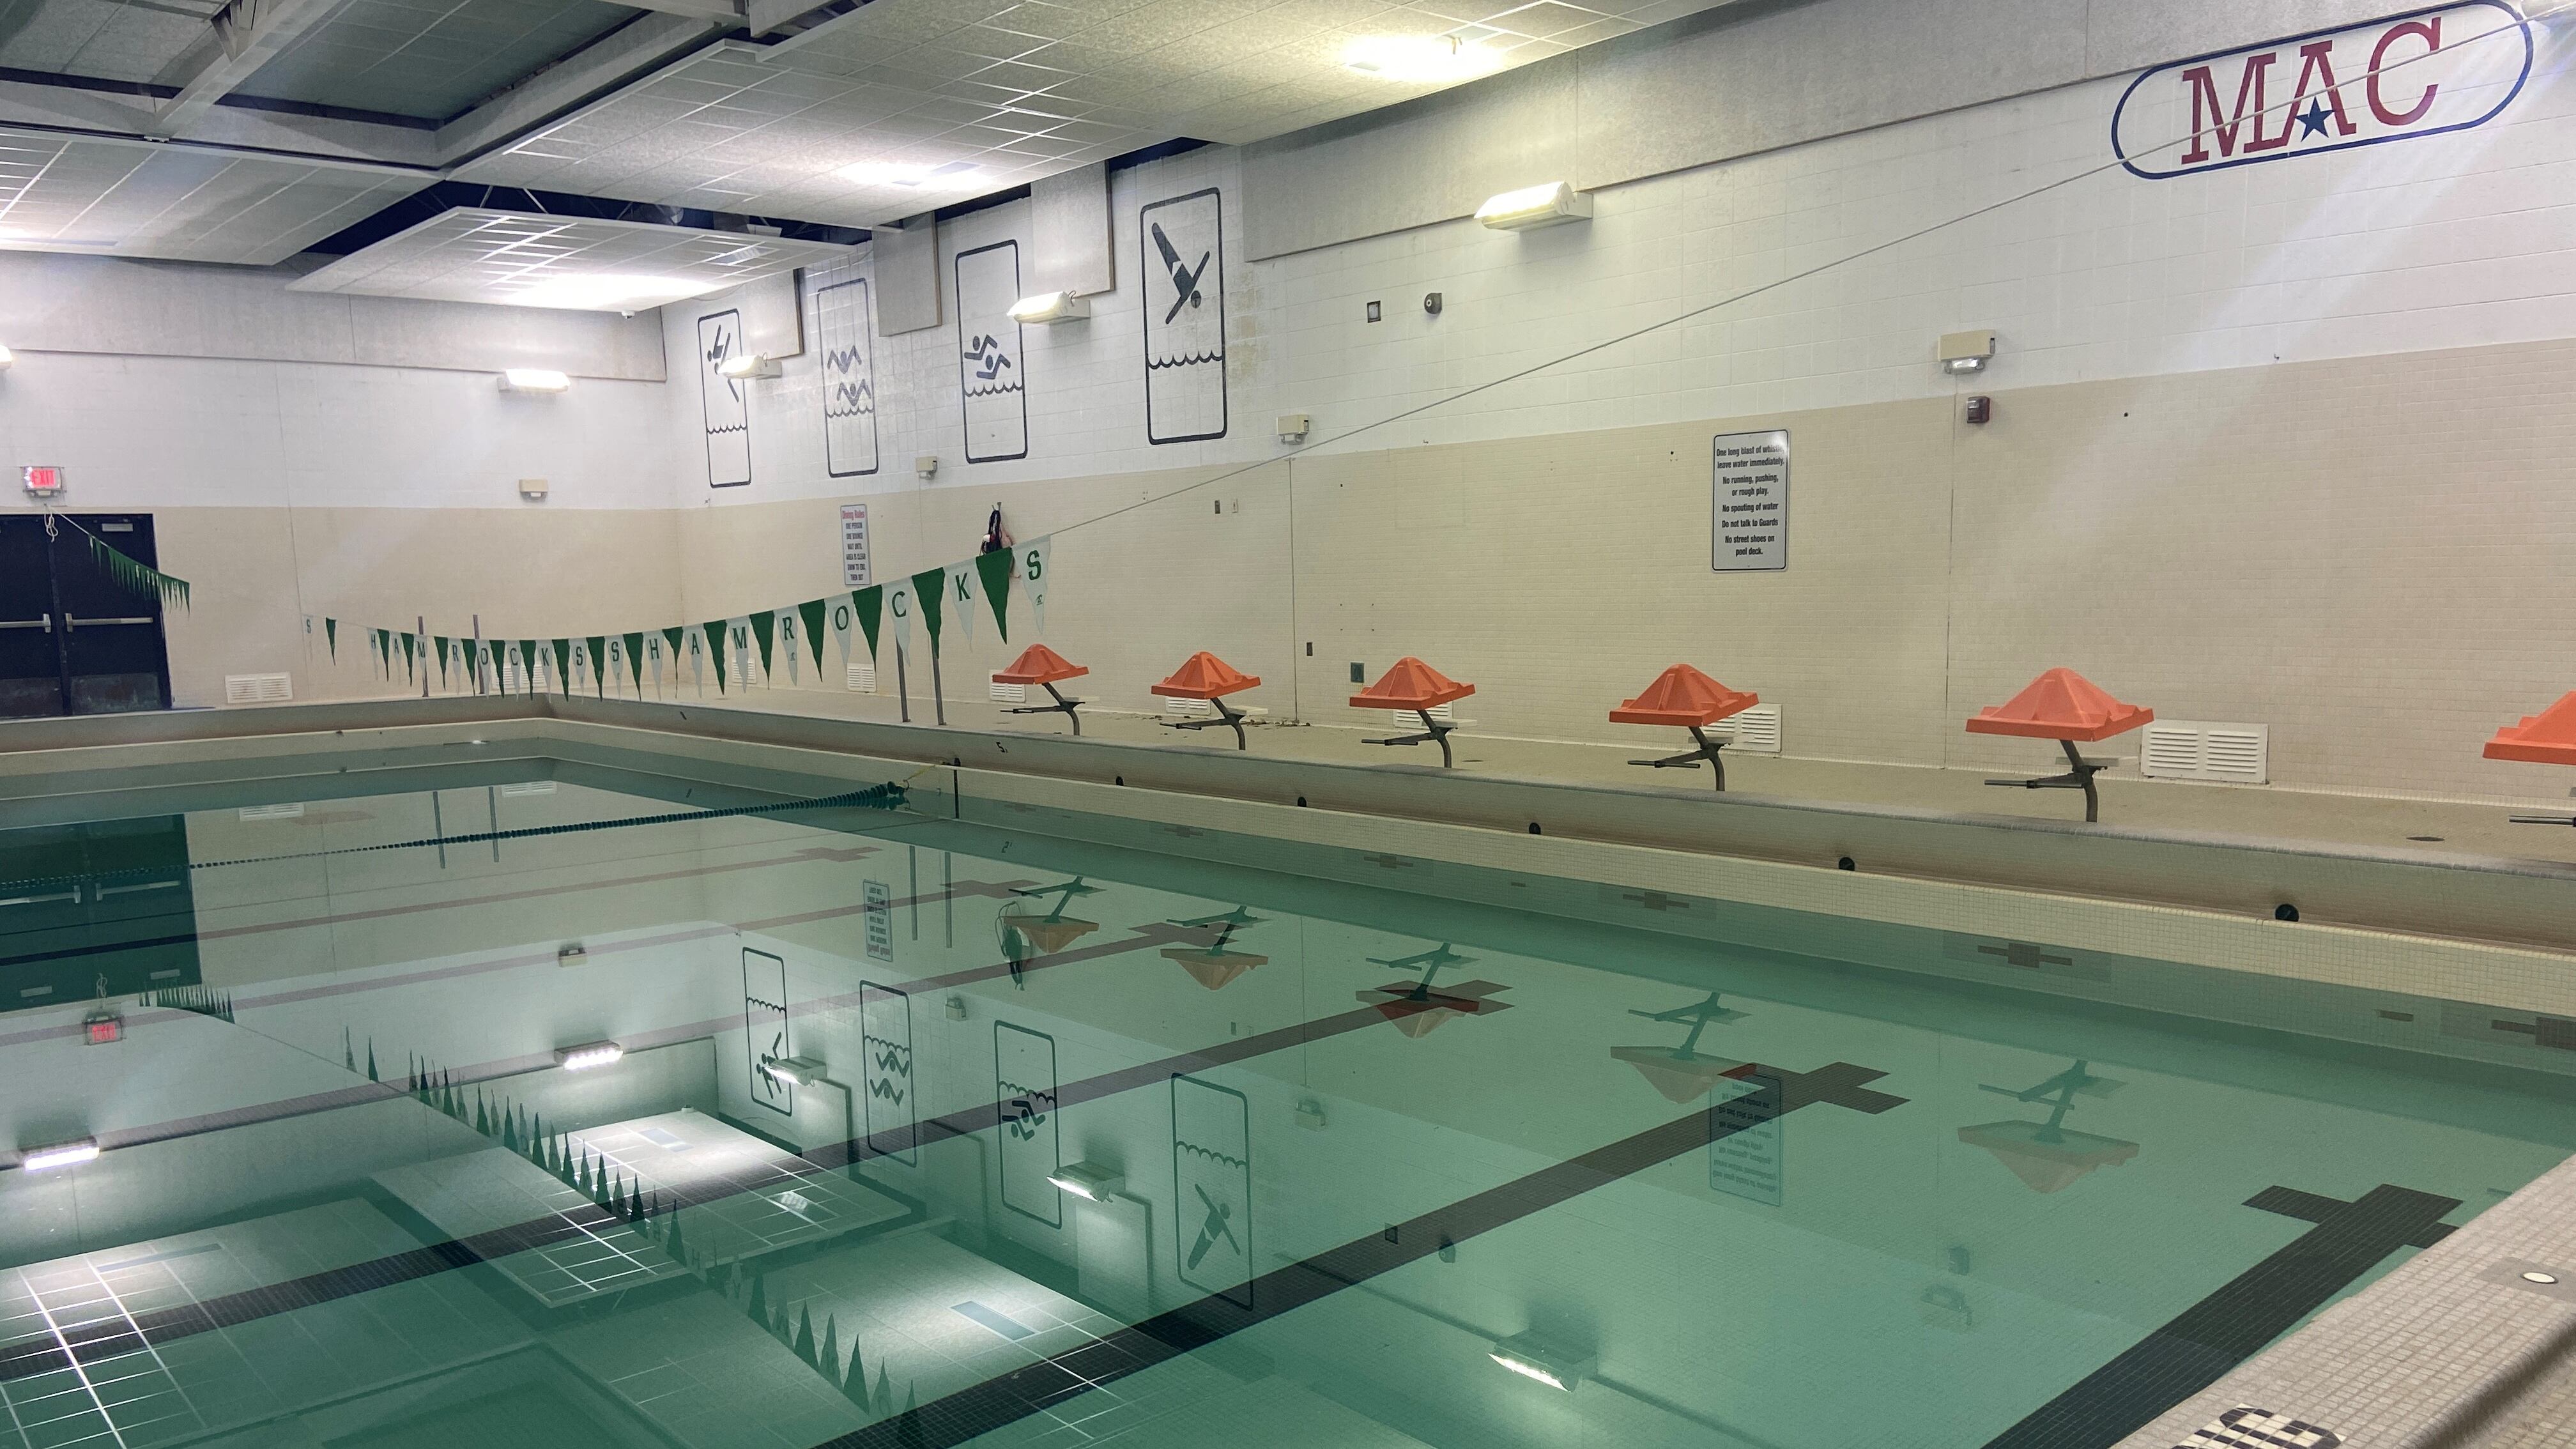 A swimming pool in the Eastpointe school district is shown.